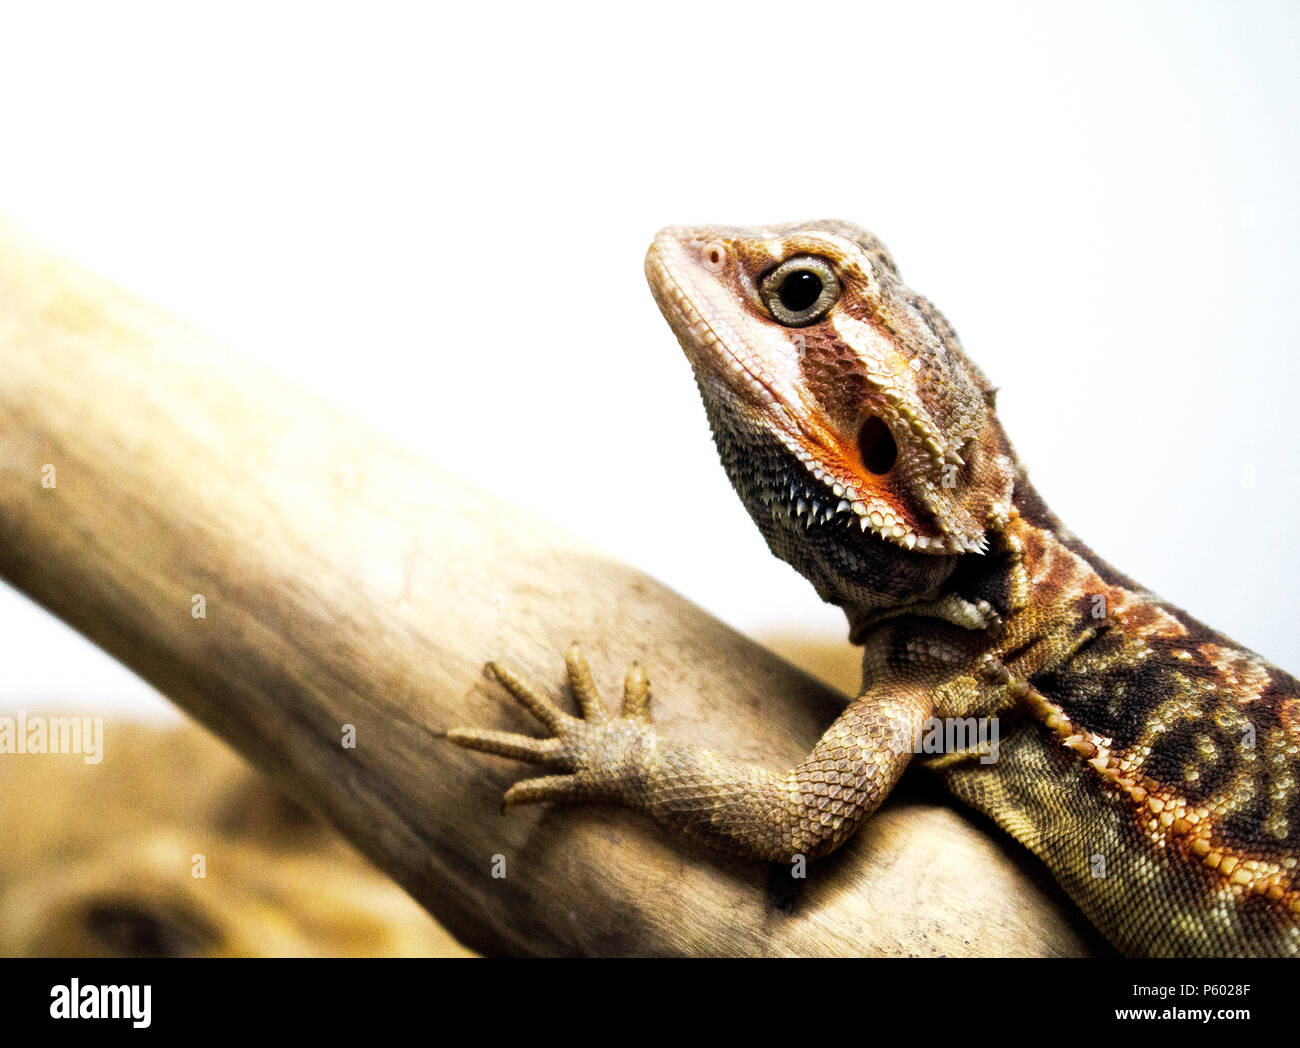 Close up of a Bearded Dragon Lizard on a branch against a white background Stock Photo